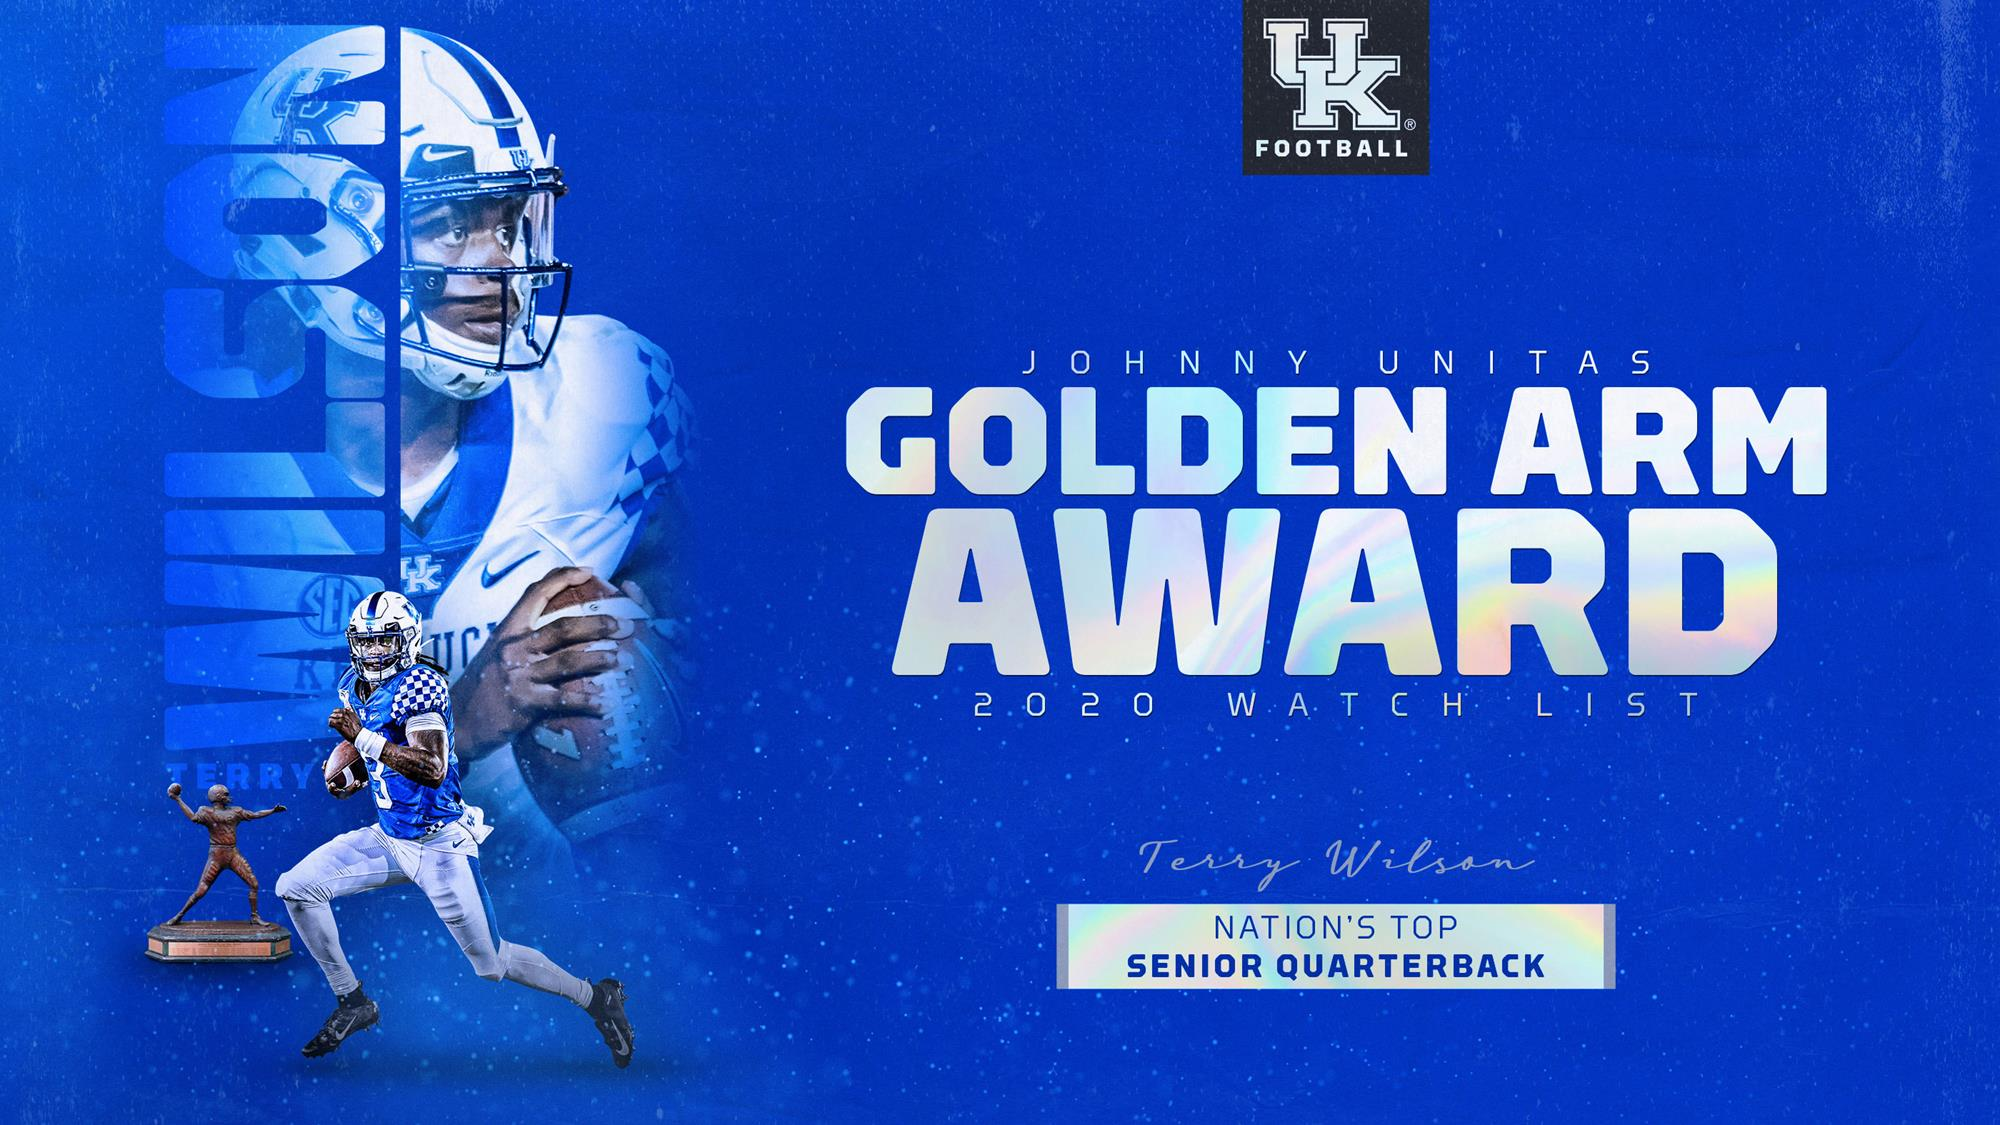 Terry Wilson Named to Johnny Unitas Golden Arm Watch List